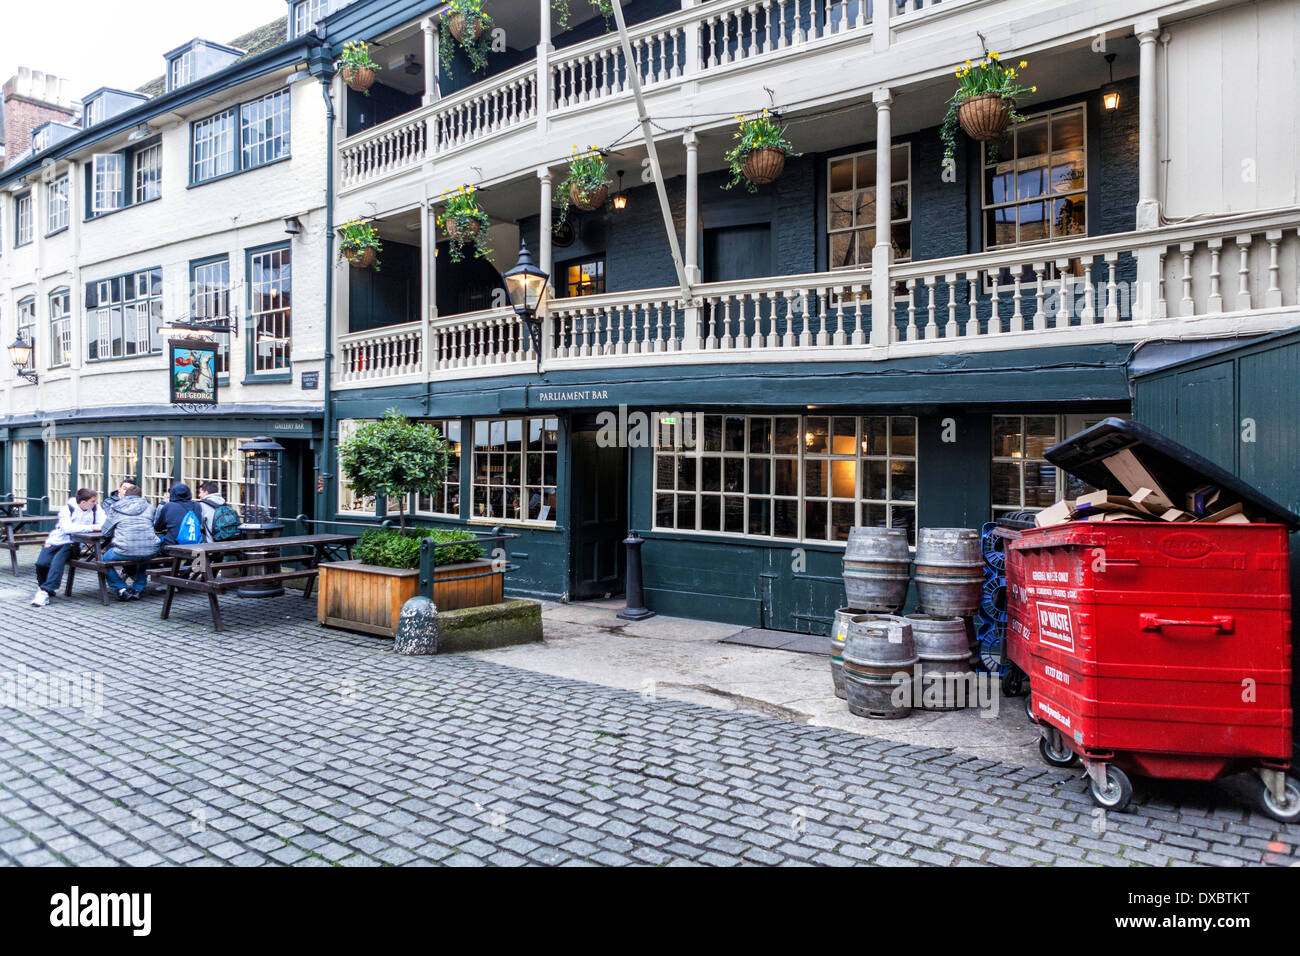 The George Inn Traditional English pub, the only surviving galleried coaching inn in London - Borough High Street, SE1 UK Stock Photo